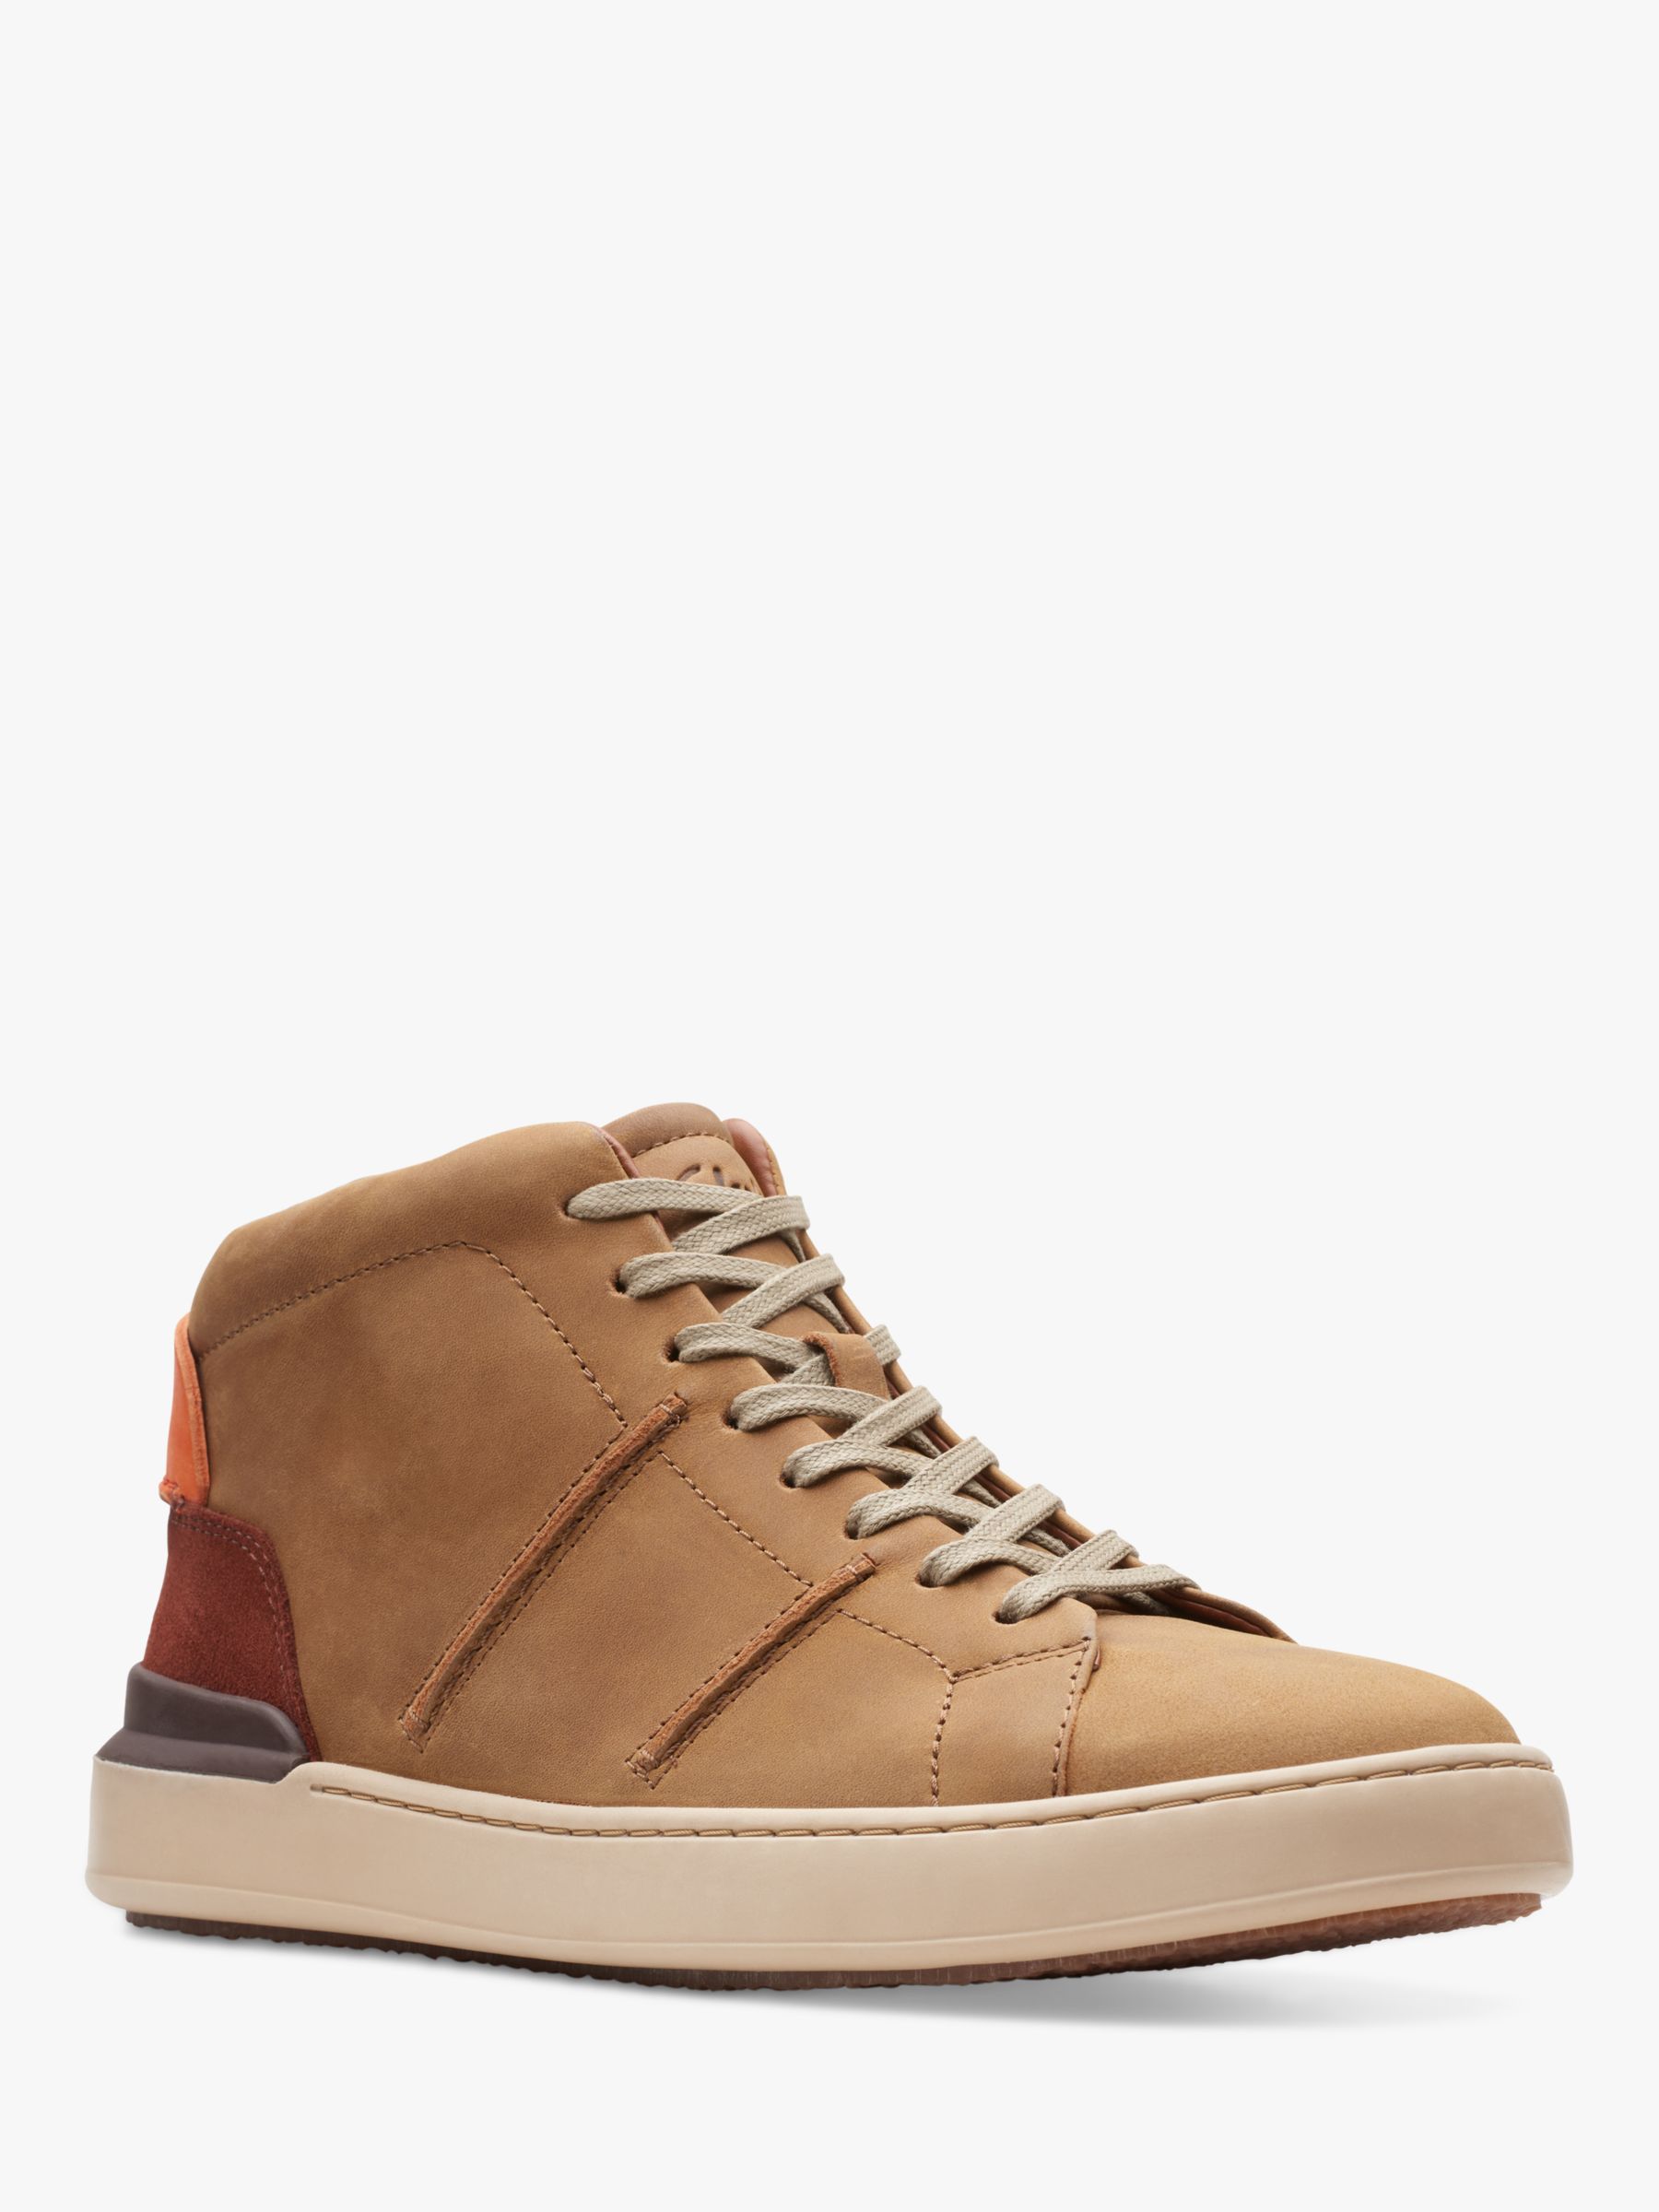 Clarks CourtLite Lace Up Leather High Top Trainers